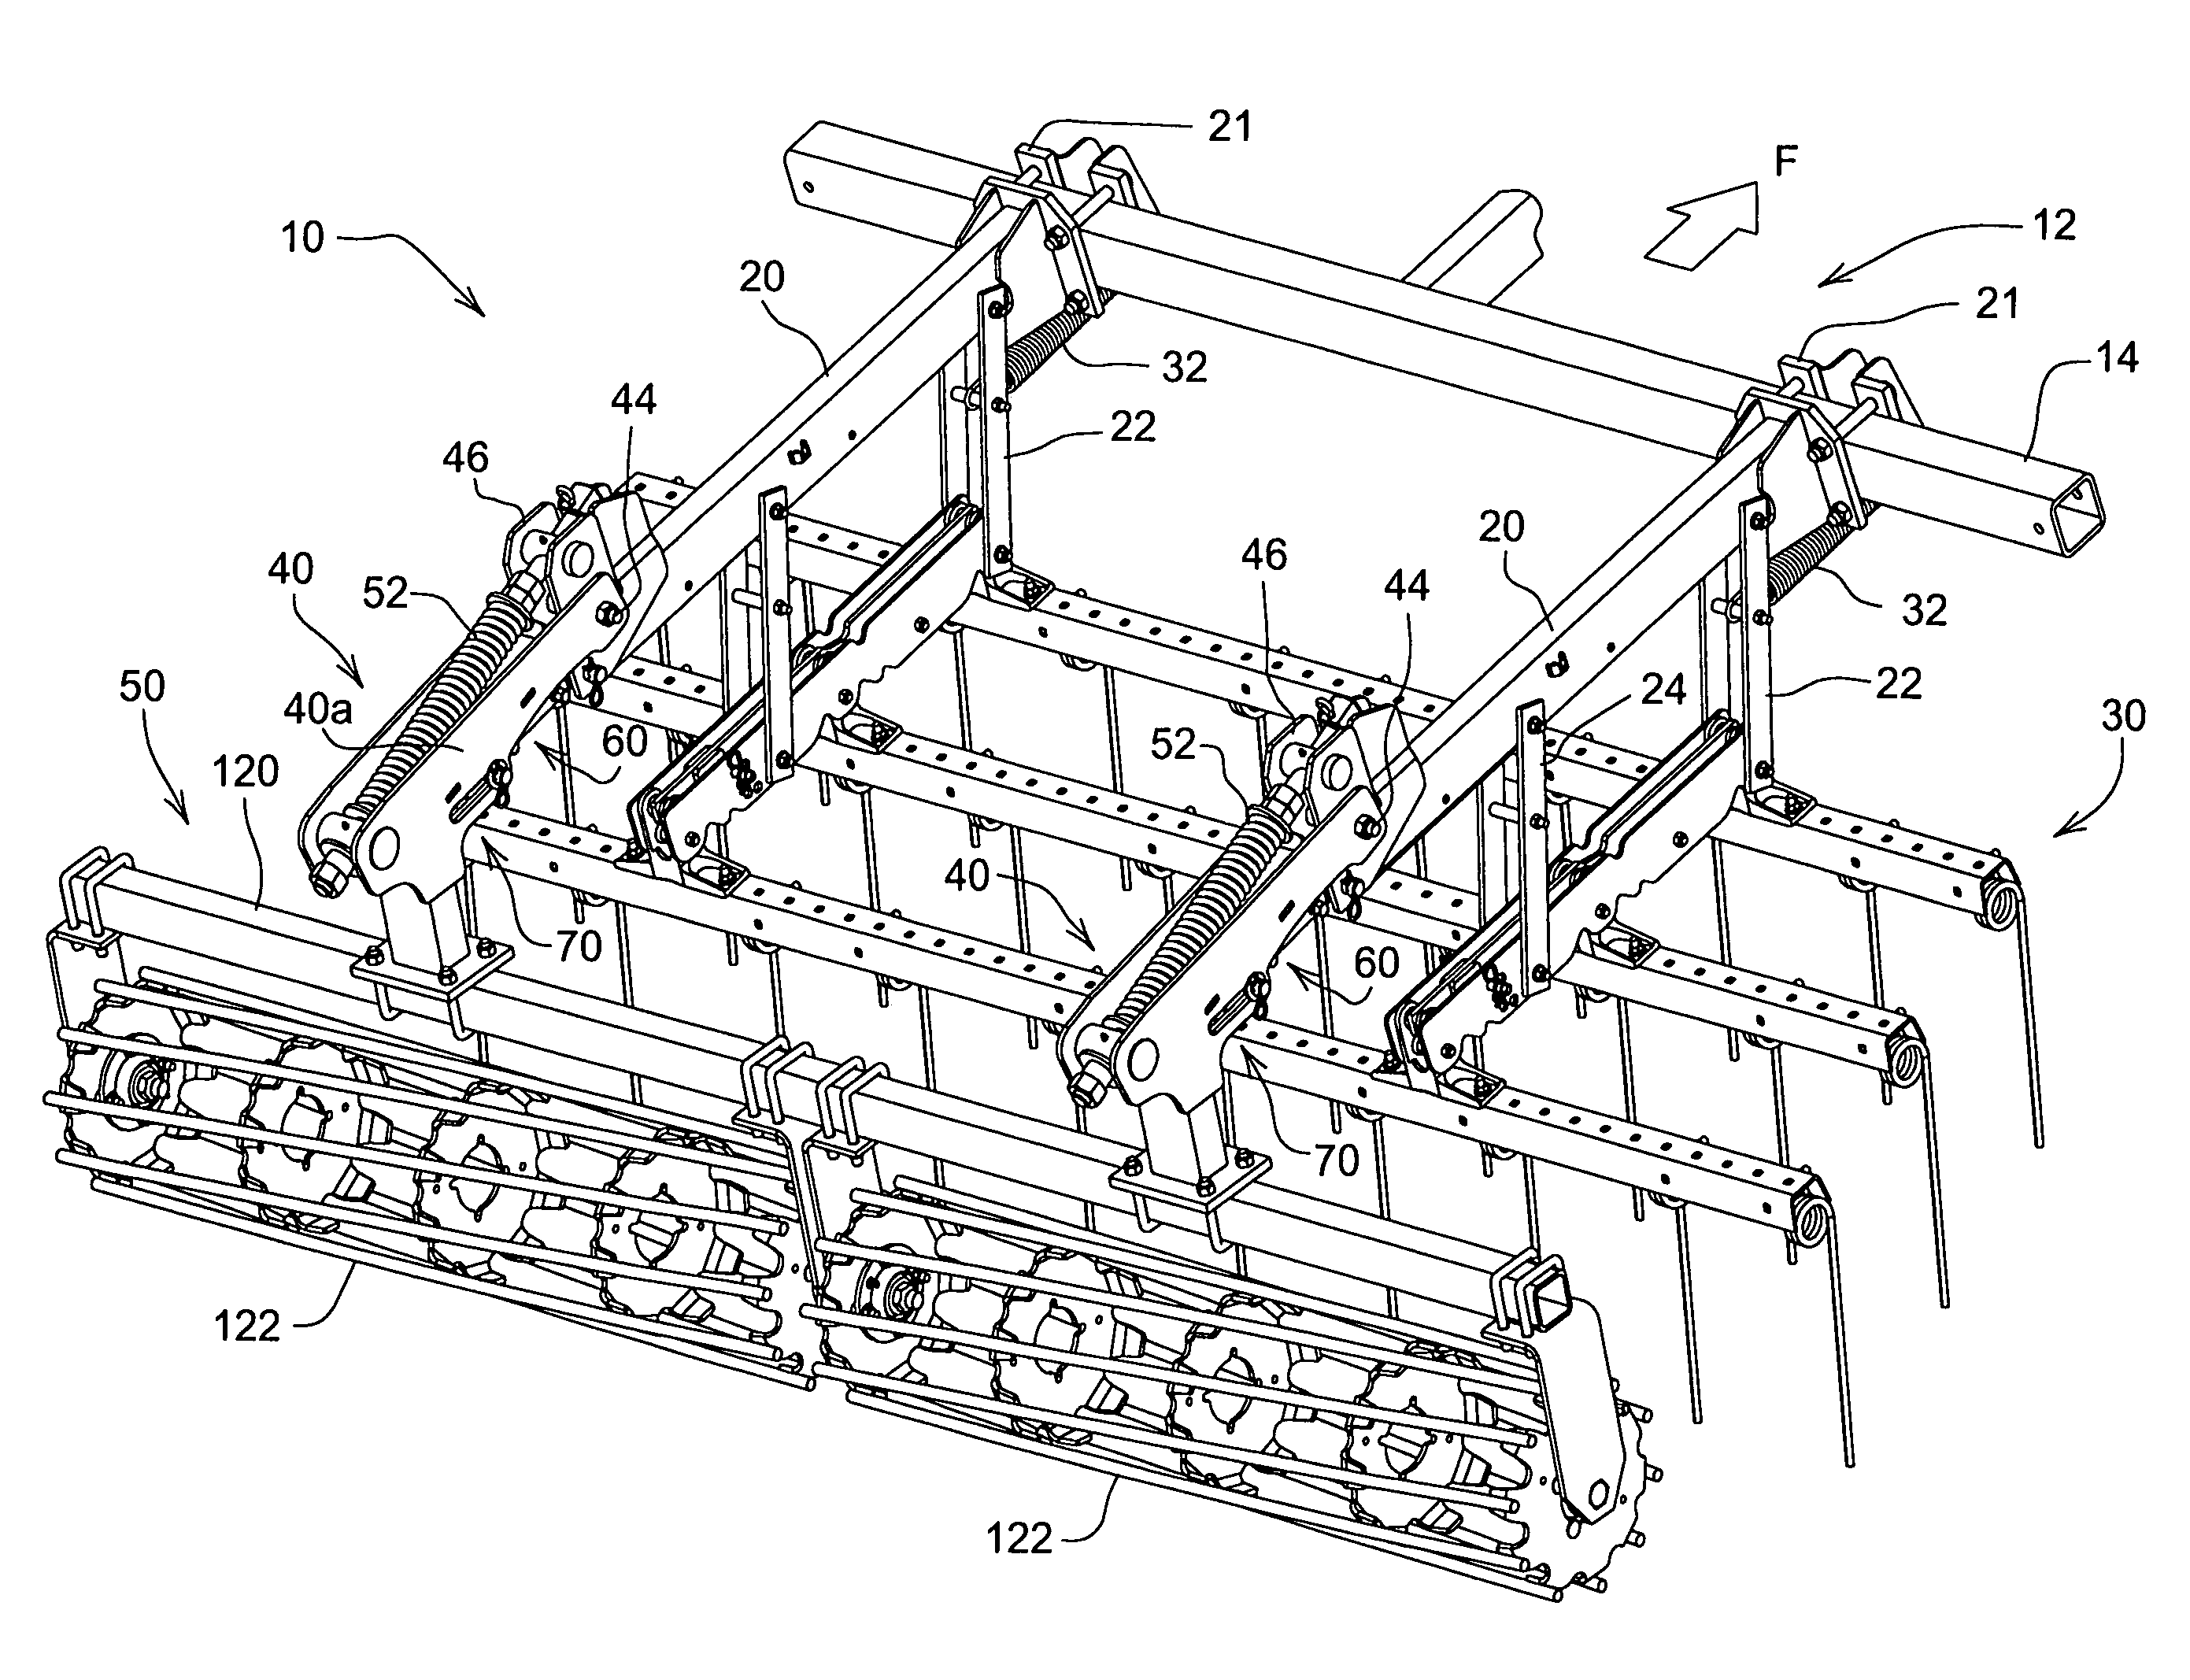 Hydraulic lift rolling basket structure for a tillage implement